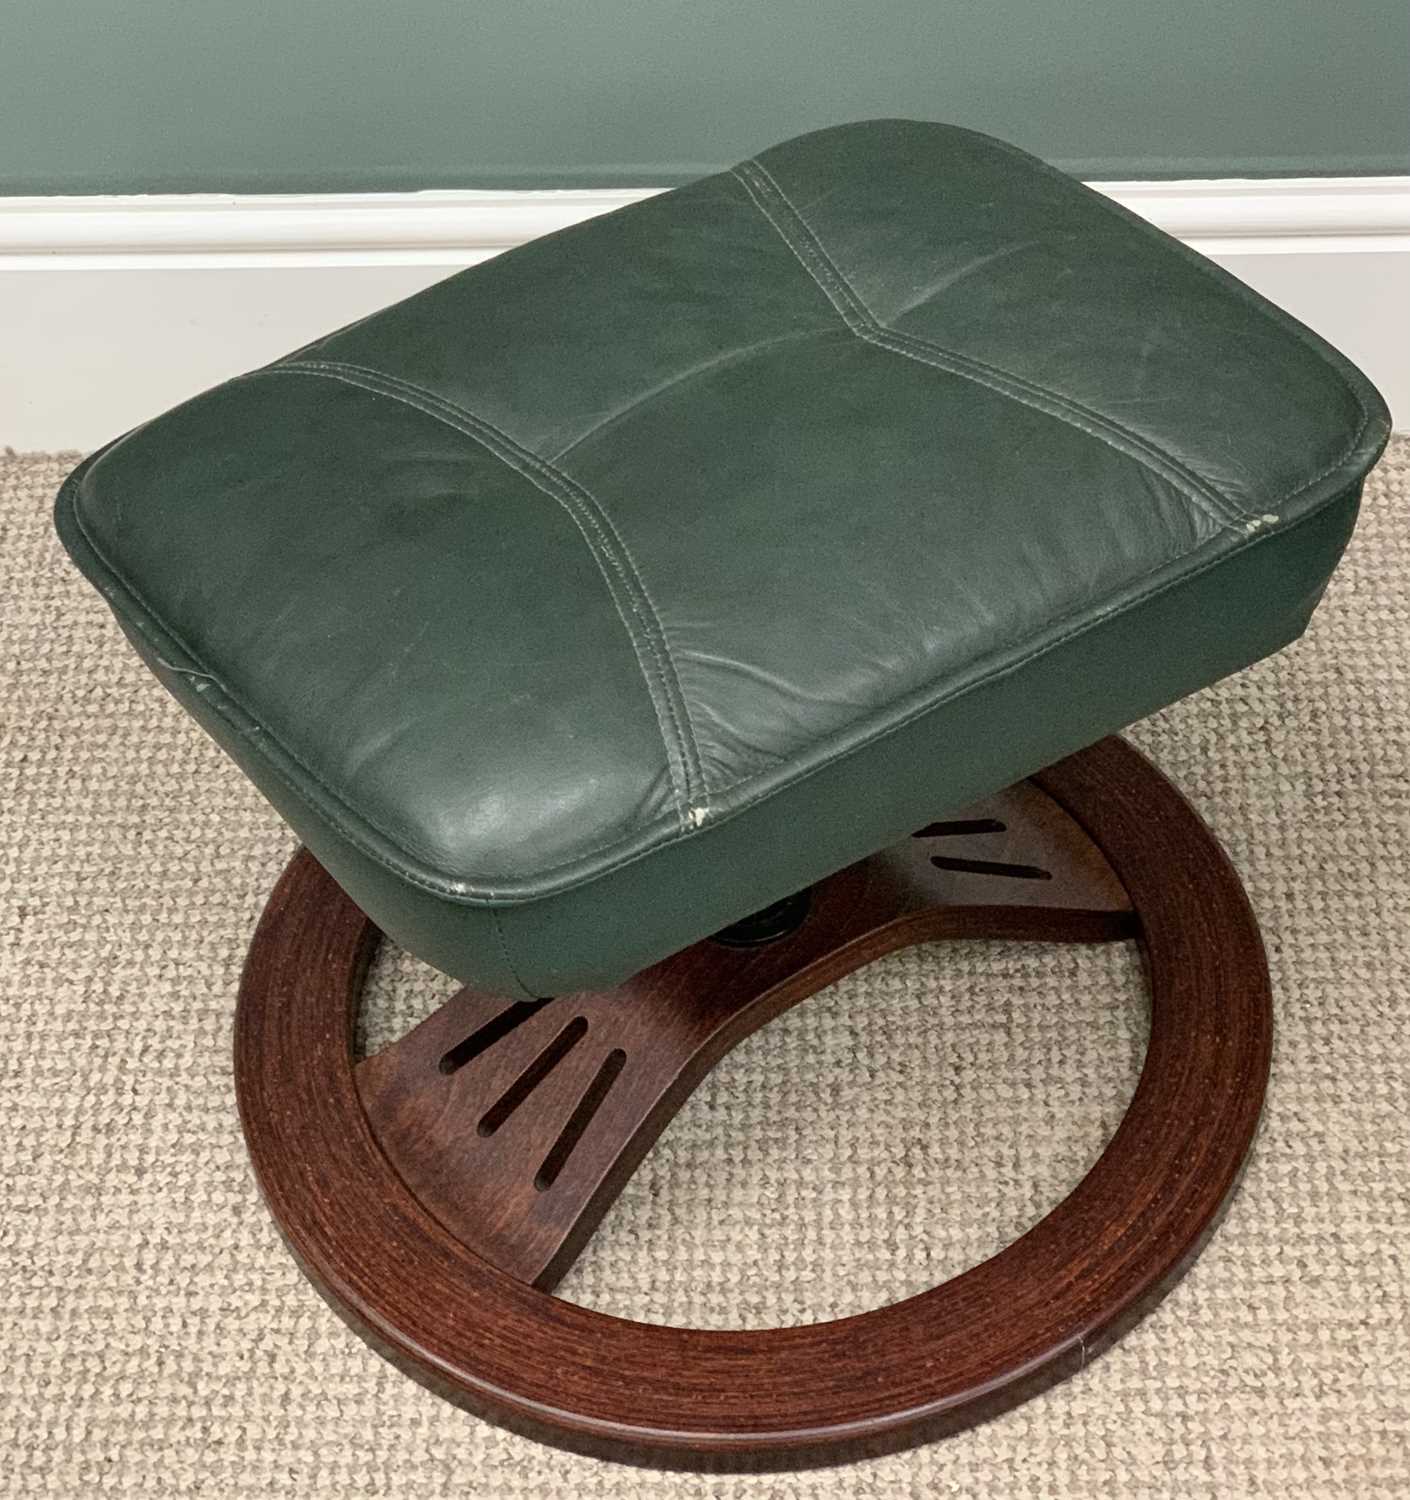 STRESSLESS TYPE REVOLVING & RECLINING ARMCHAIR with matching footstool, in green leather effect - Image 3 of 4